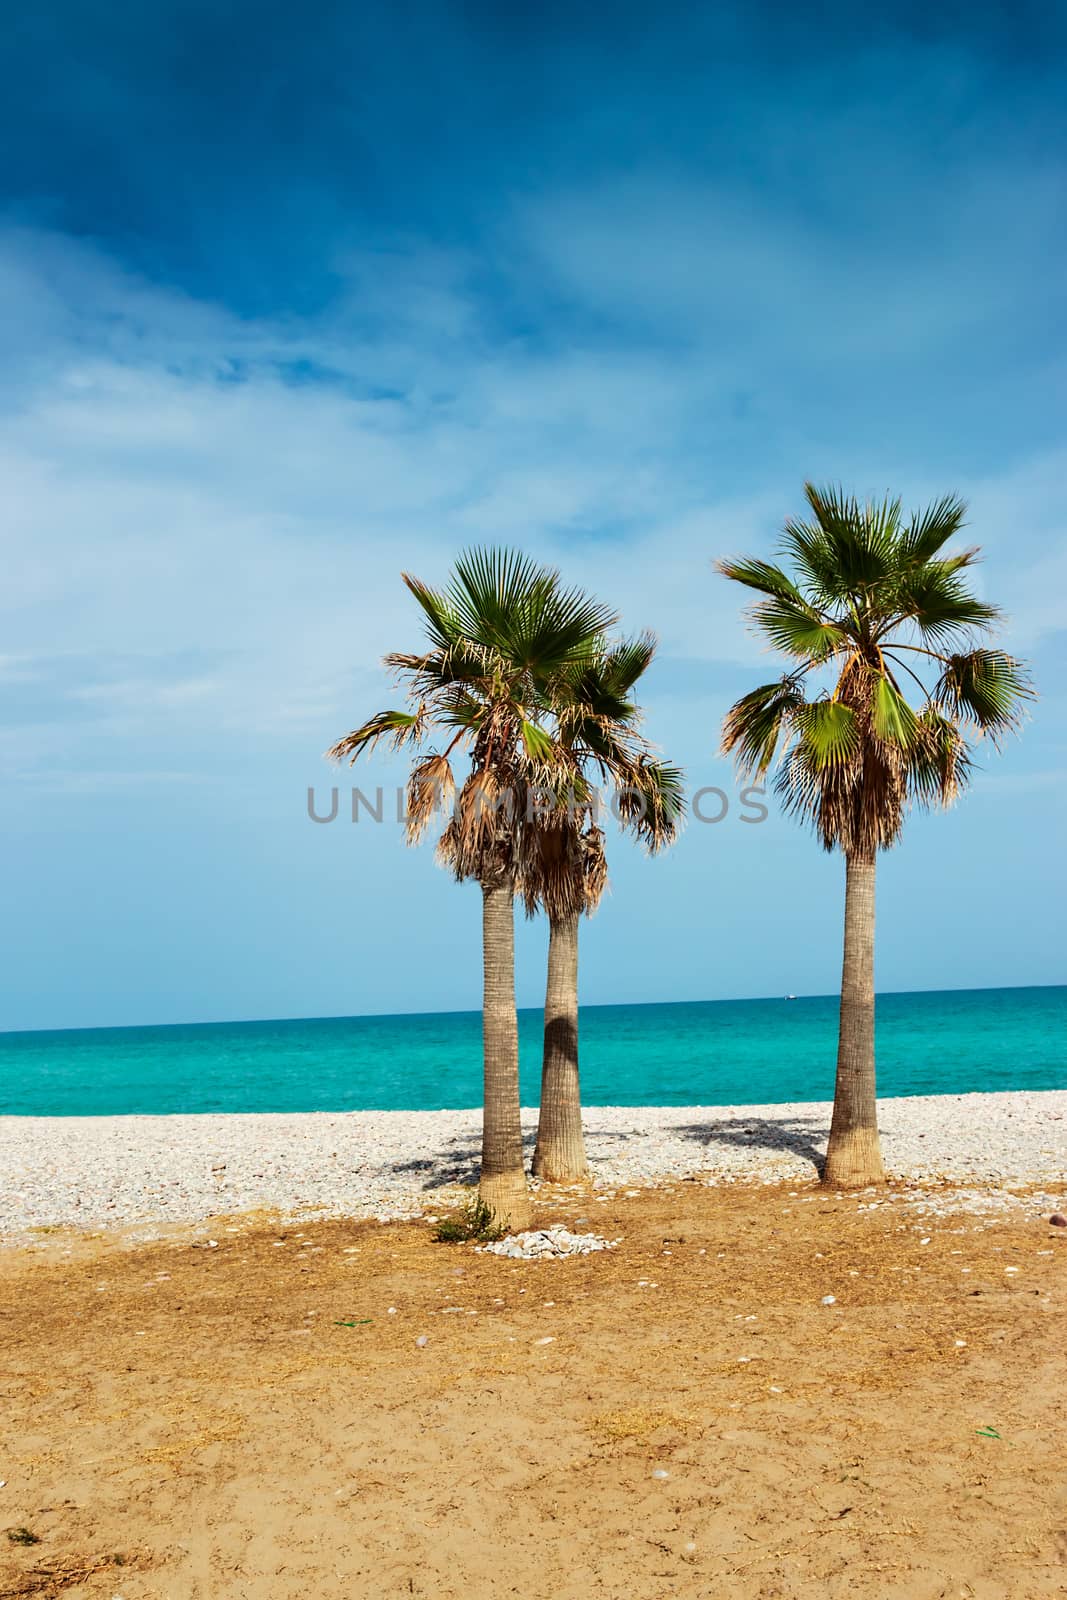 Palm trees in a very calm beach. Vertical image.